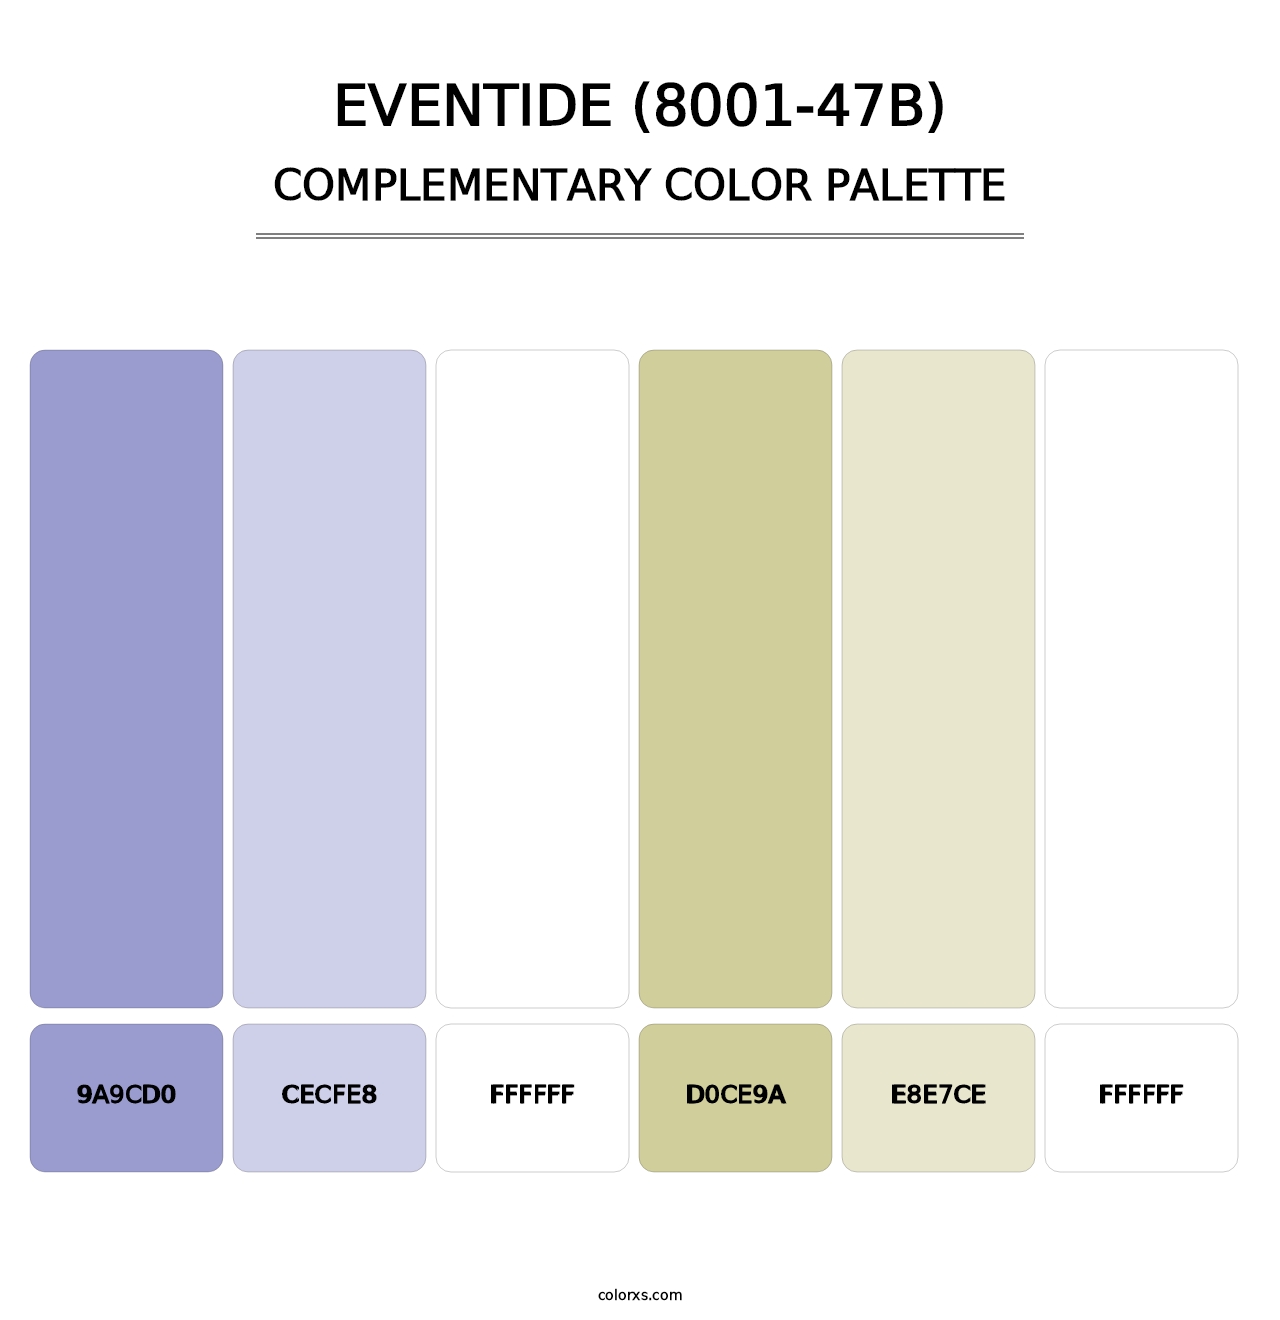 Eventide (8001-47B) - Complementary Color Palette